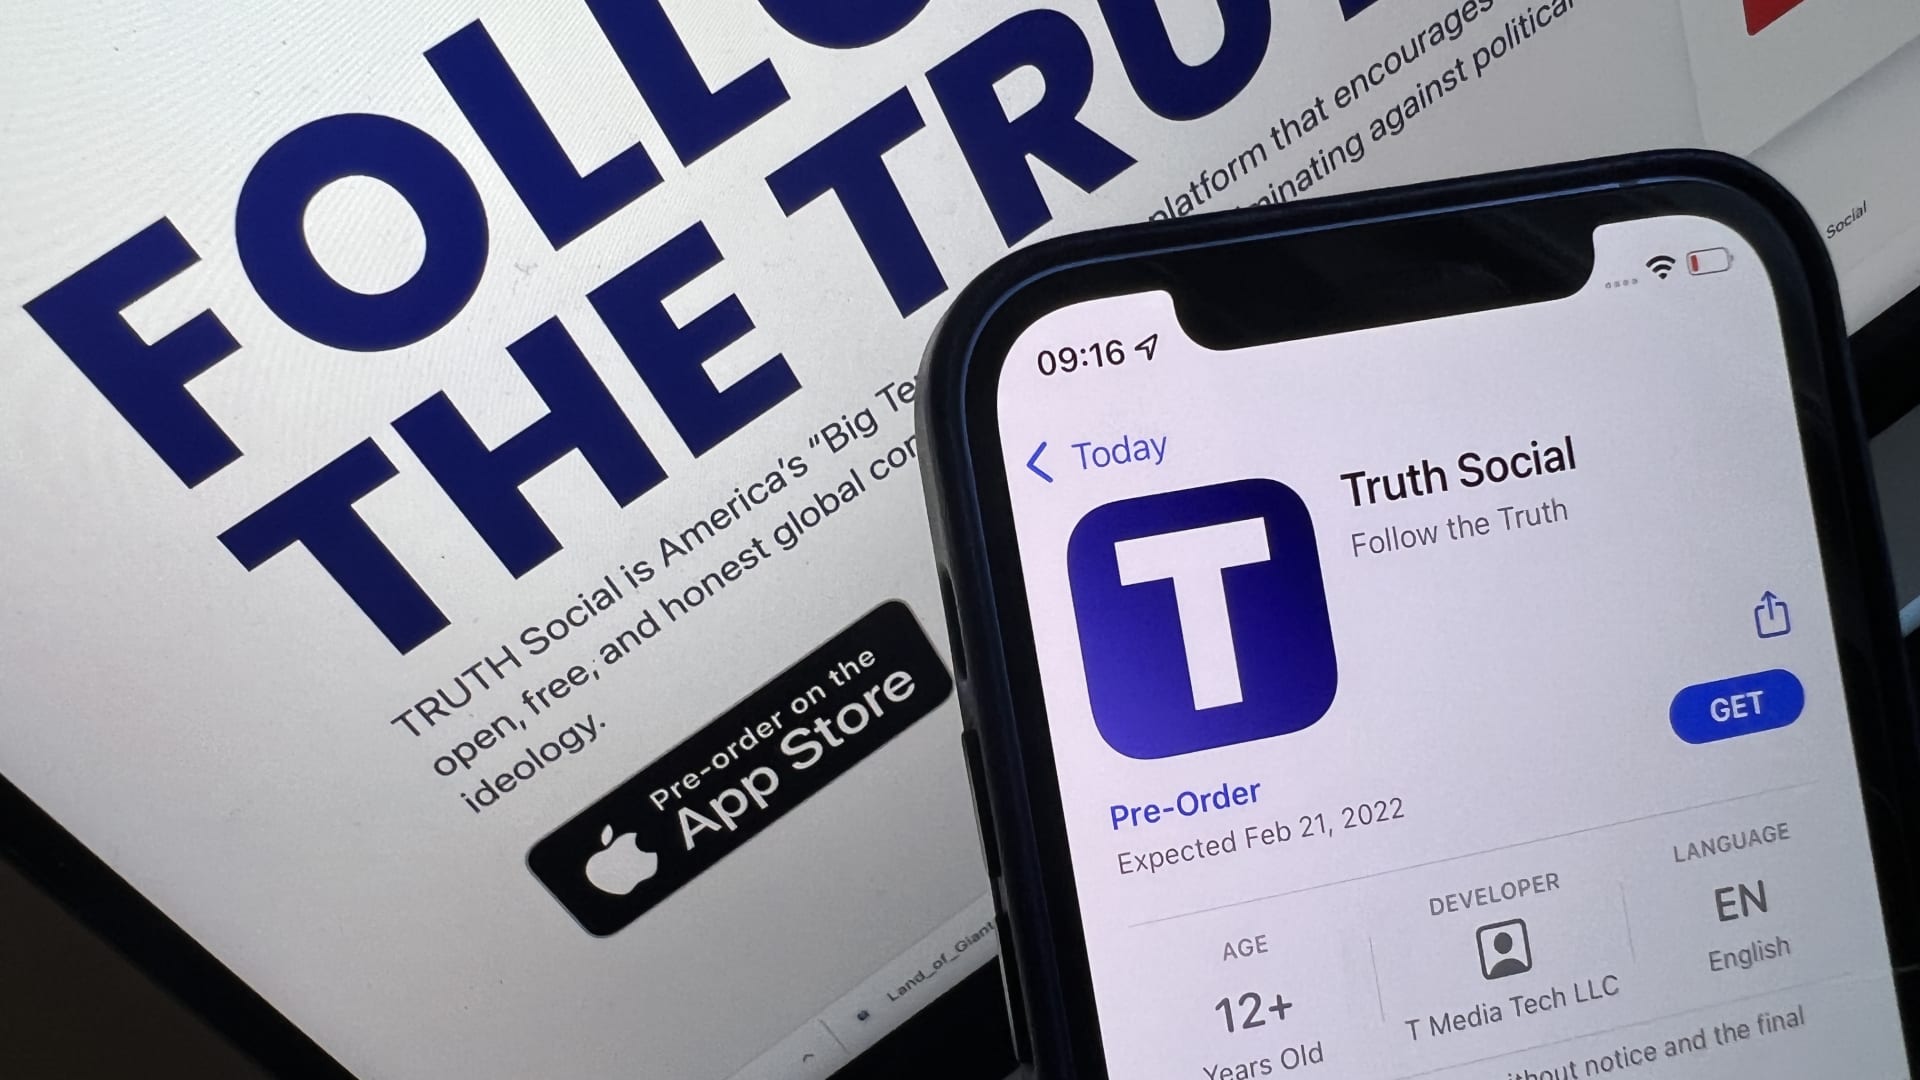 Trump urged to tell Digital World shareholders to vote on Truth Social merger delay